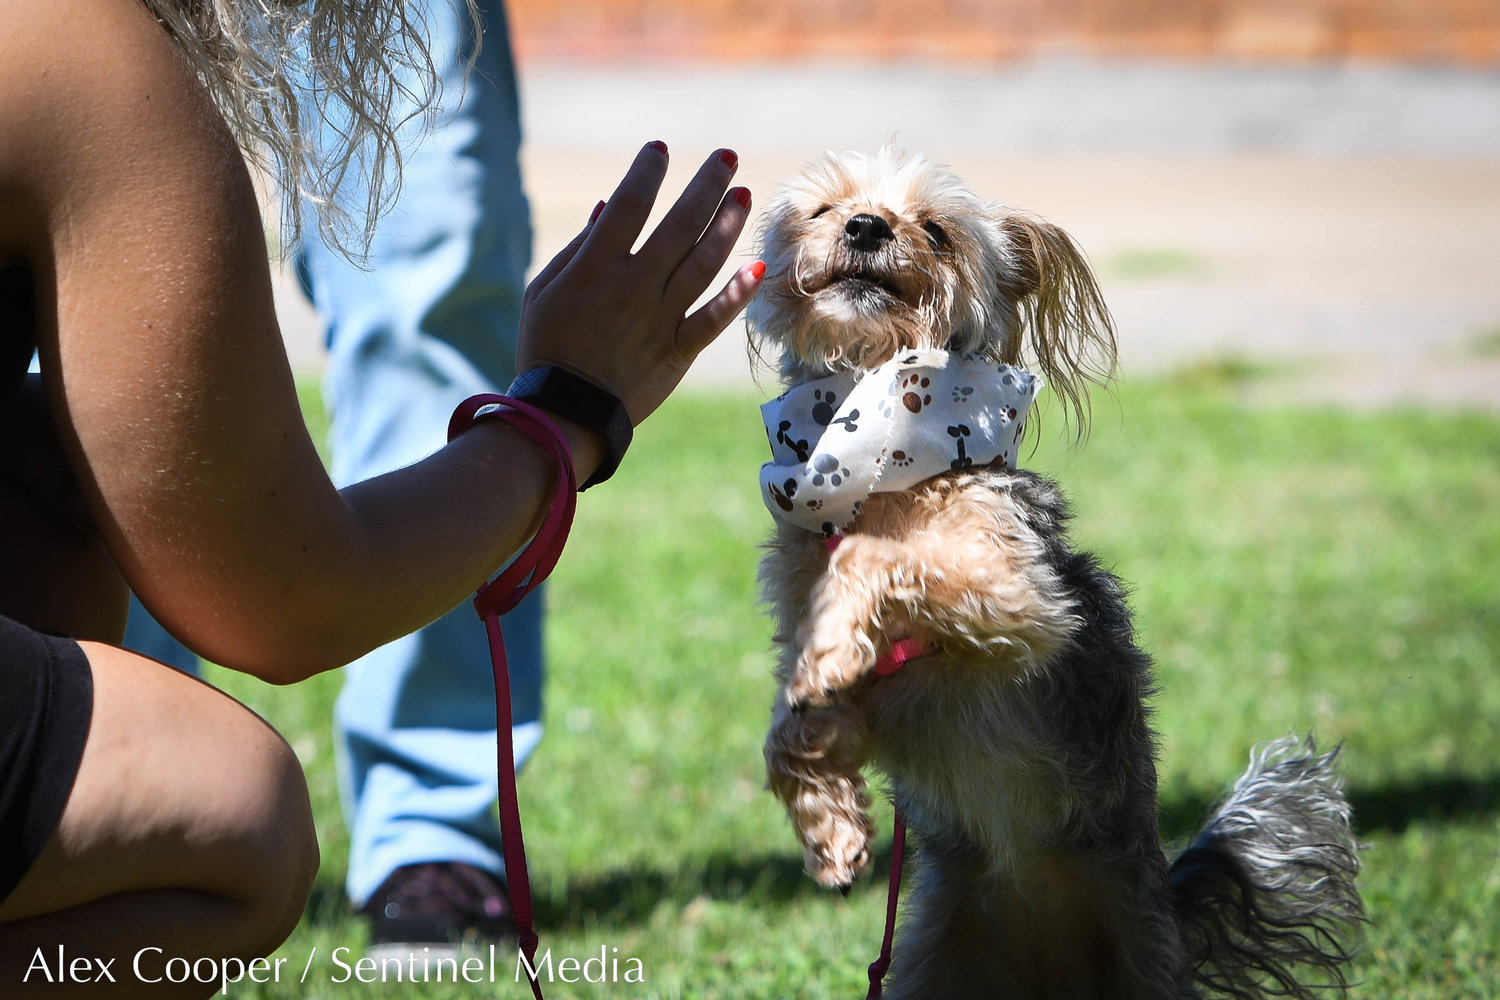 Lulu, a Yorkshire terrier and poodle mix, does a trick with her owner Amber while participating in a dog show hosted by the Herkimer County Humane Society on Saturday at Central Plaza in Ilion. The show was part of a long list of events hosted during Ilion Days 2022 from July 16-24.